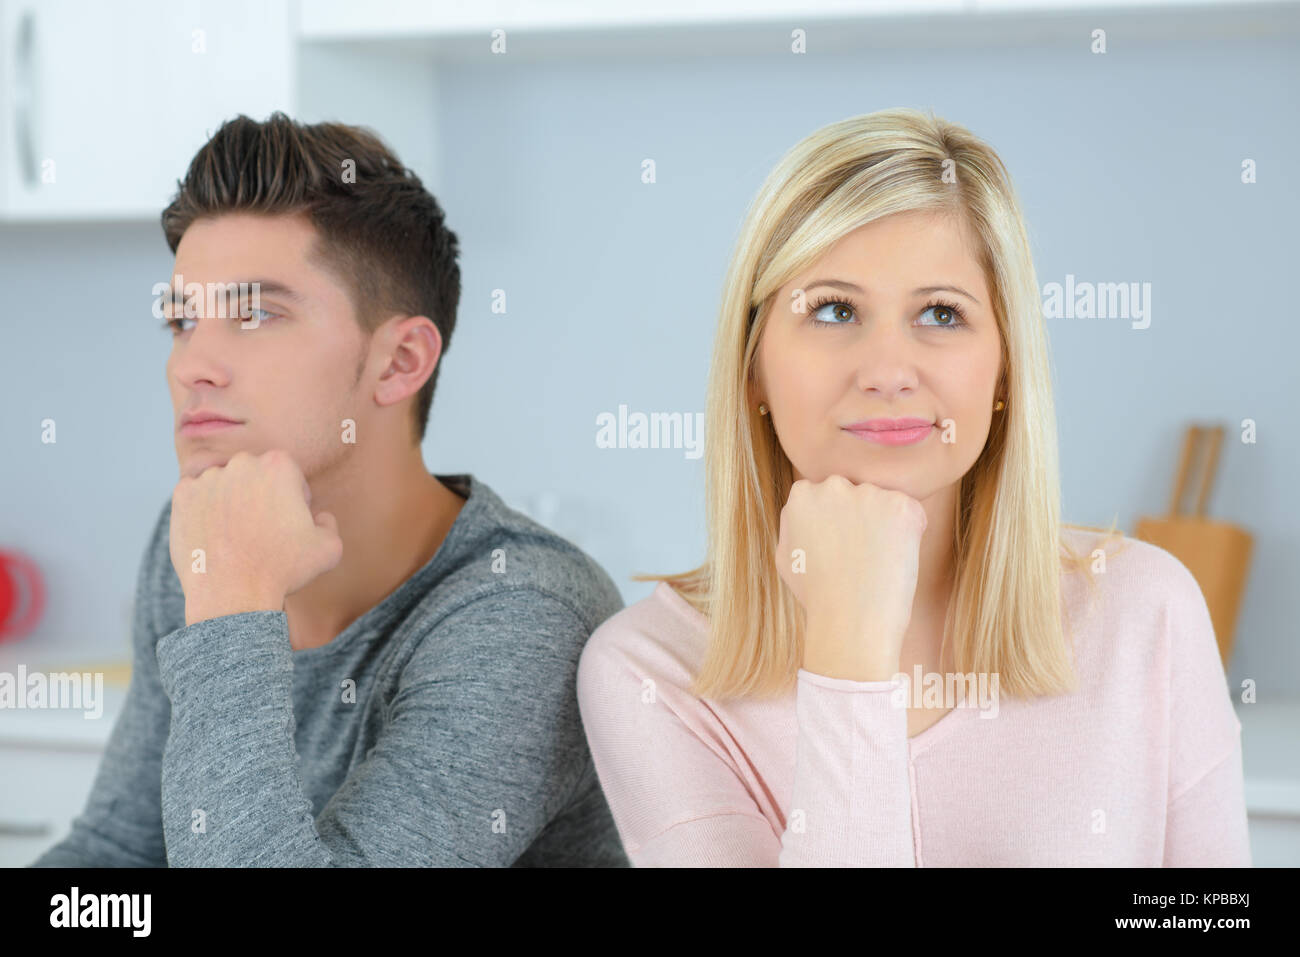 man and woman with their chins on their hands Stock Photo